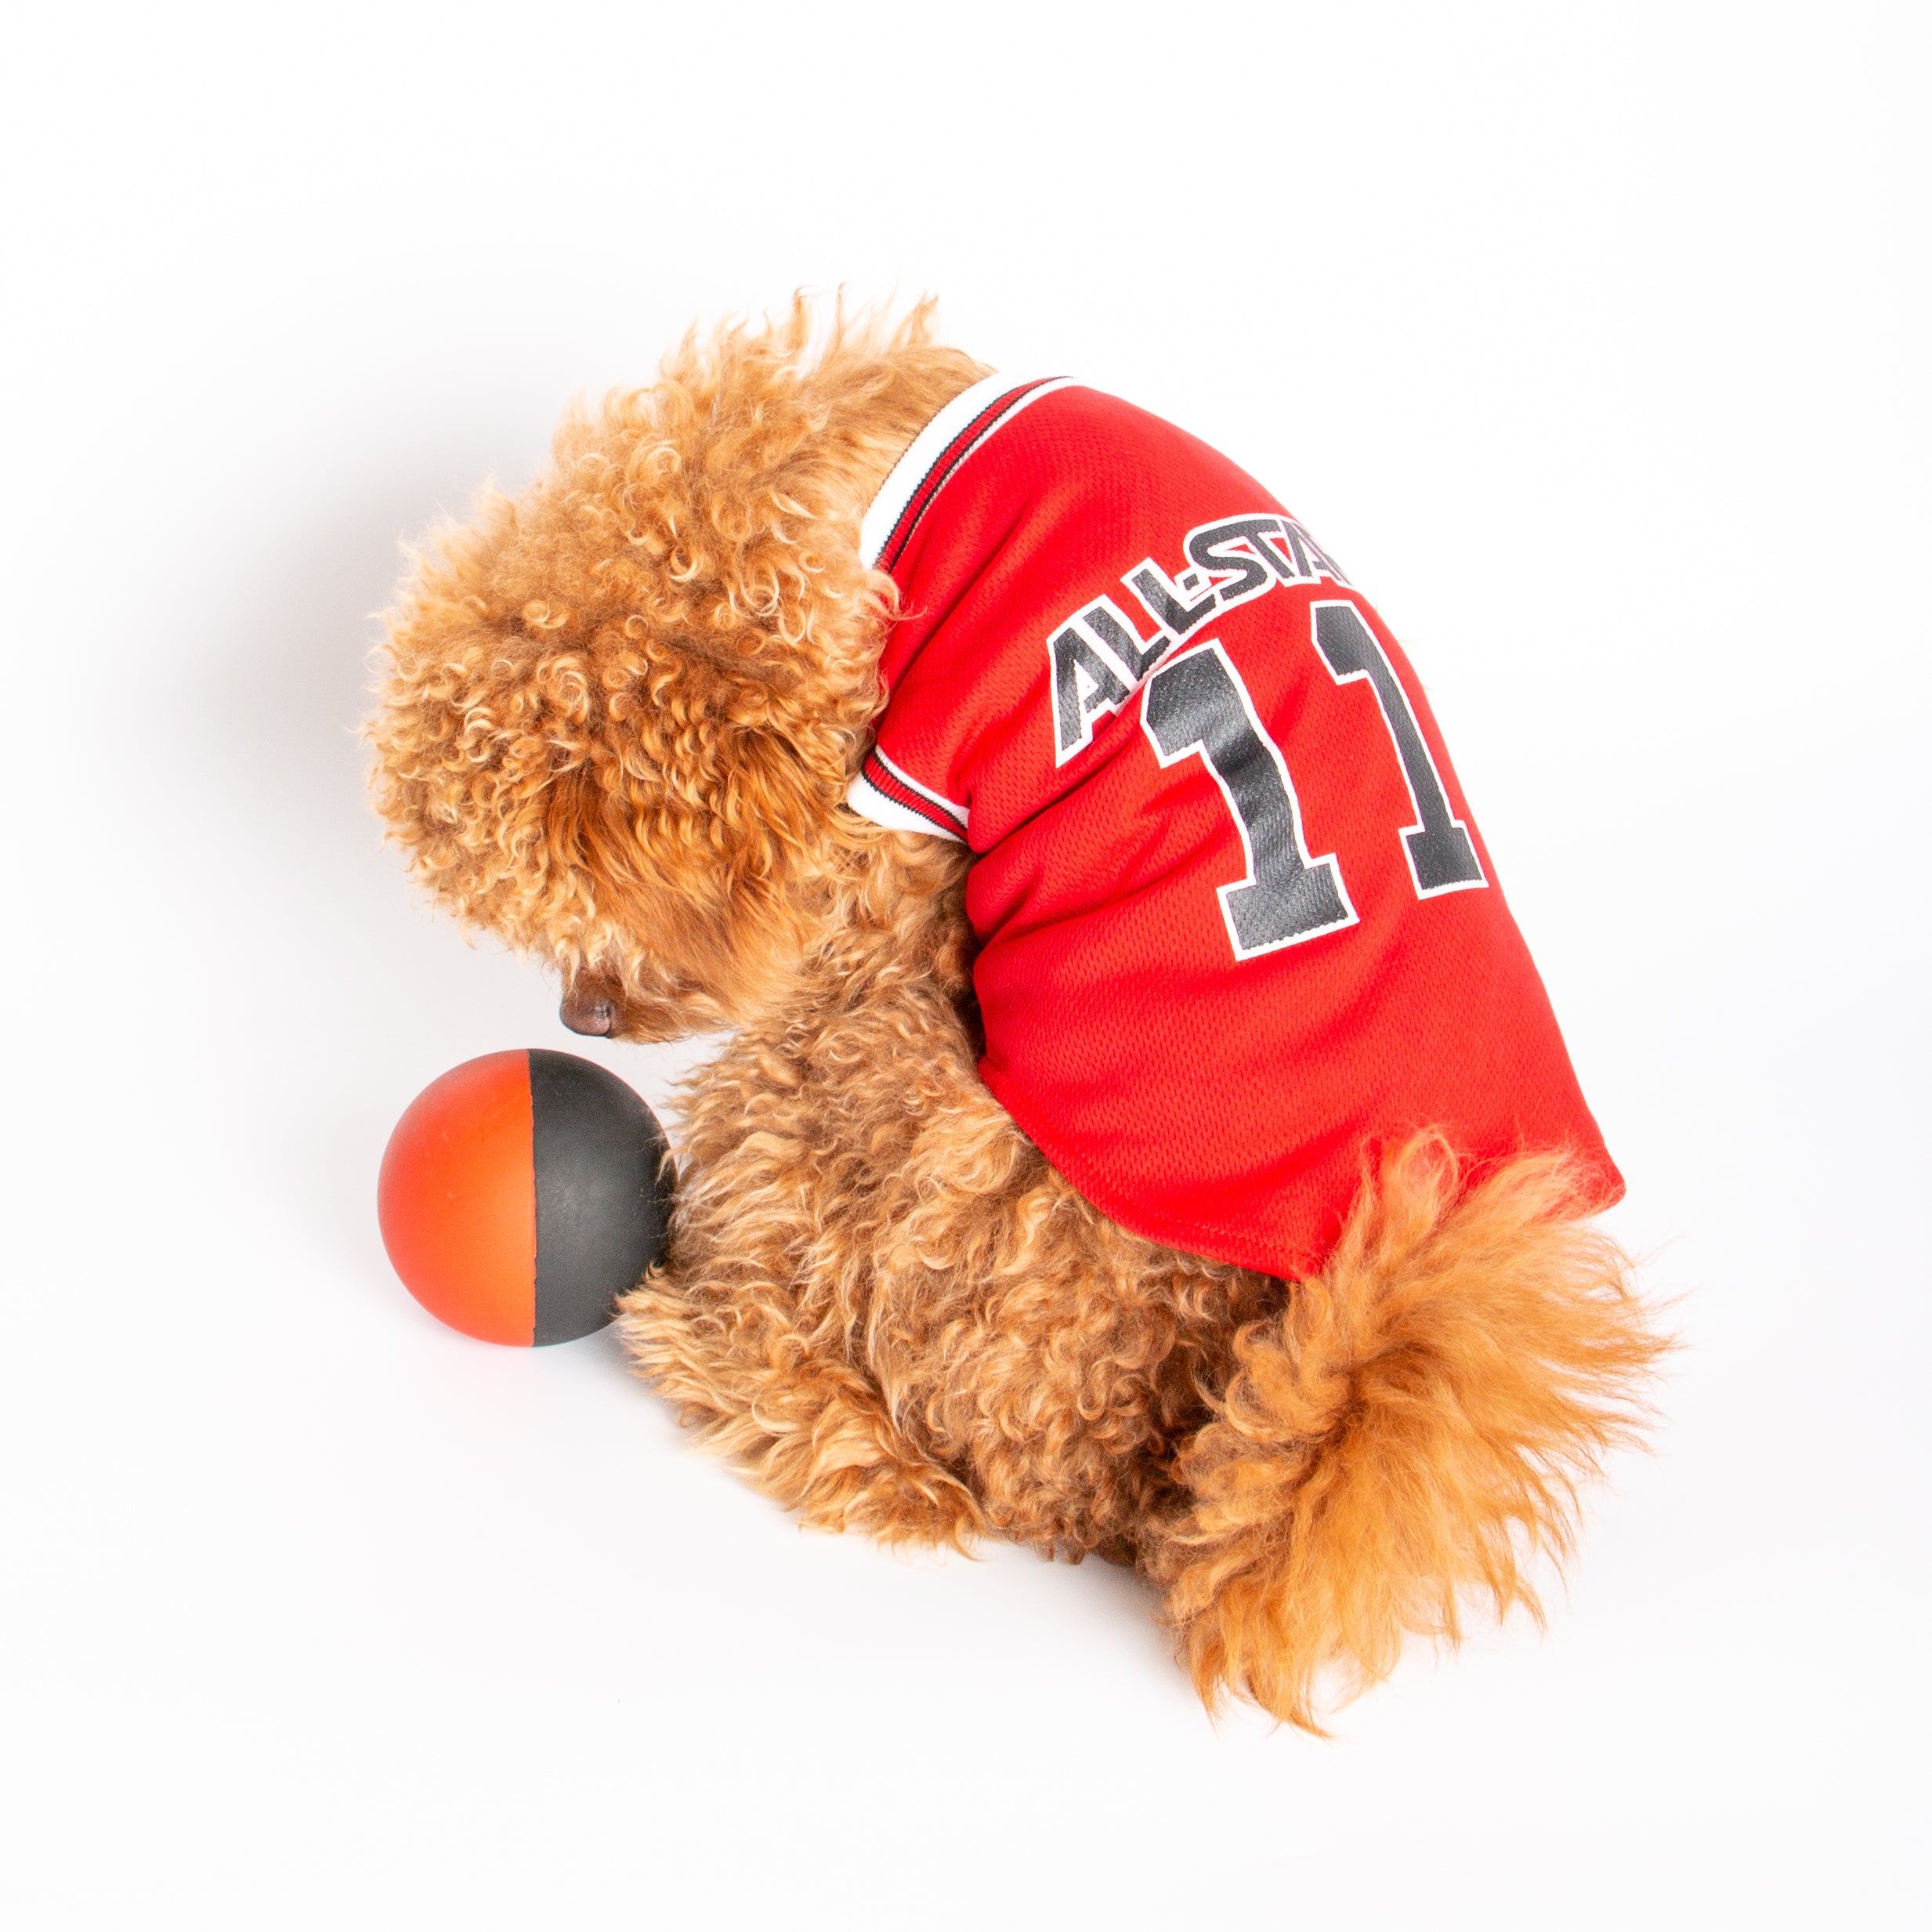 dog red sox jersey